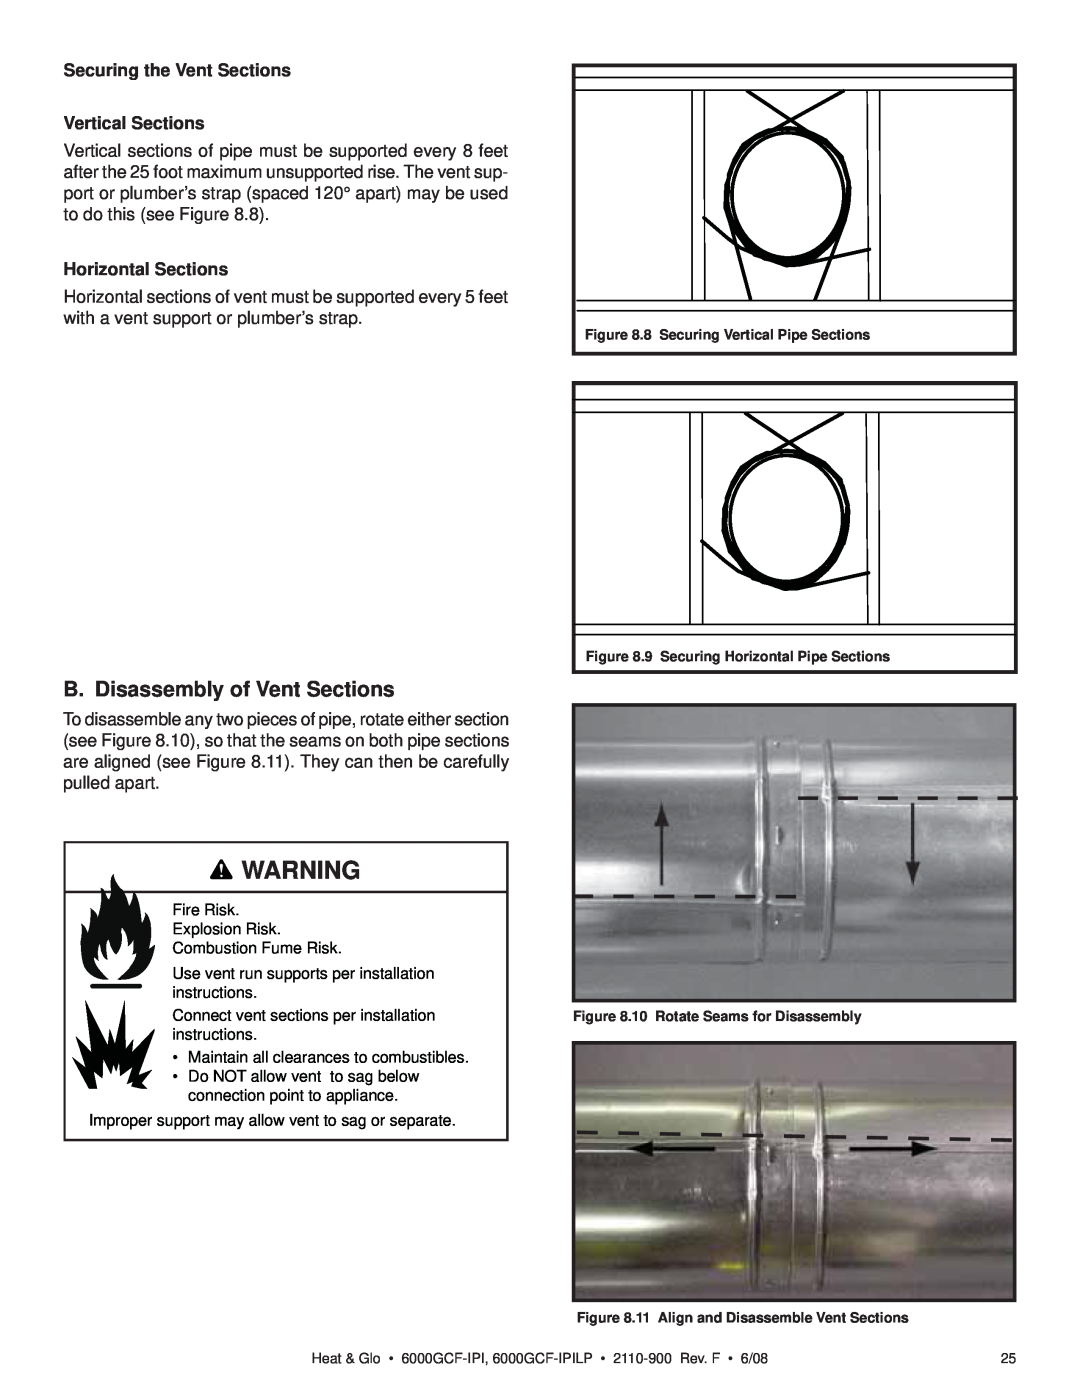 Heat & Glo LifeStyle 6000GCF-IPI owner manual B. Disassembly of Vent Sections, Securing the Vent Sections Vertical Sections 